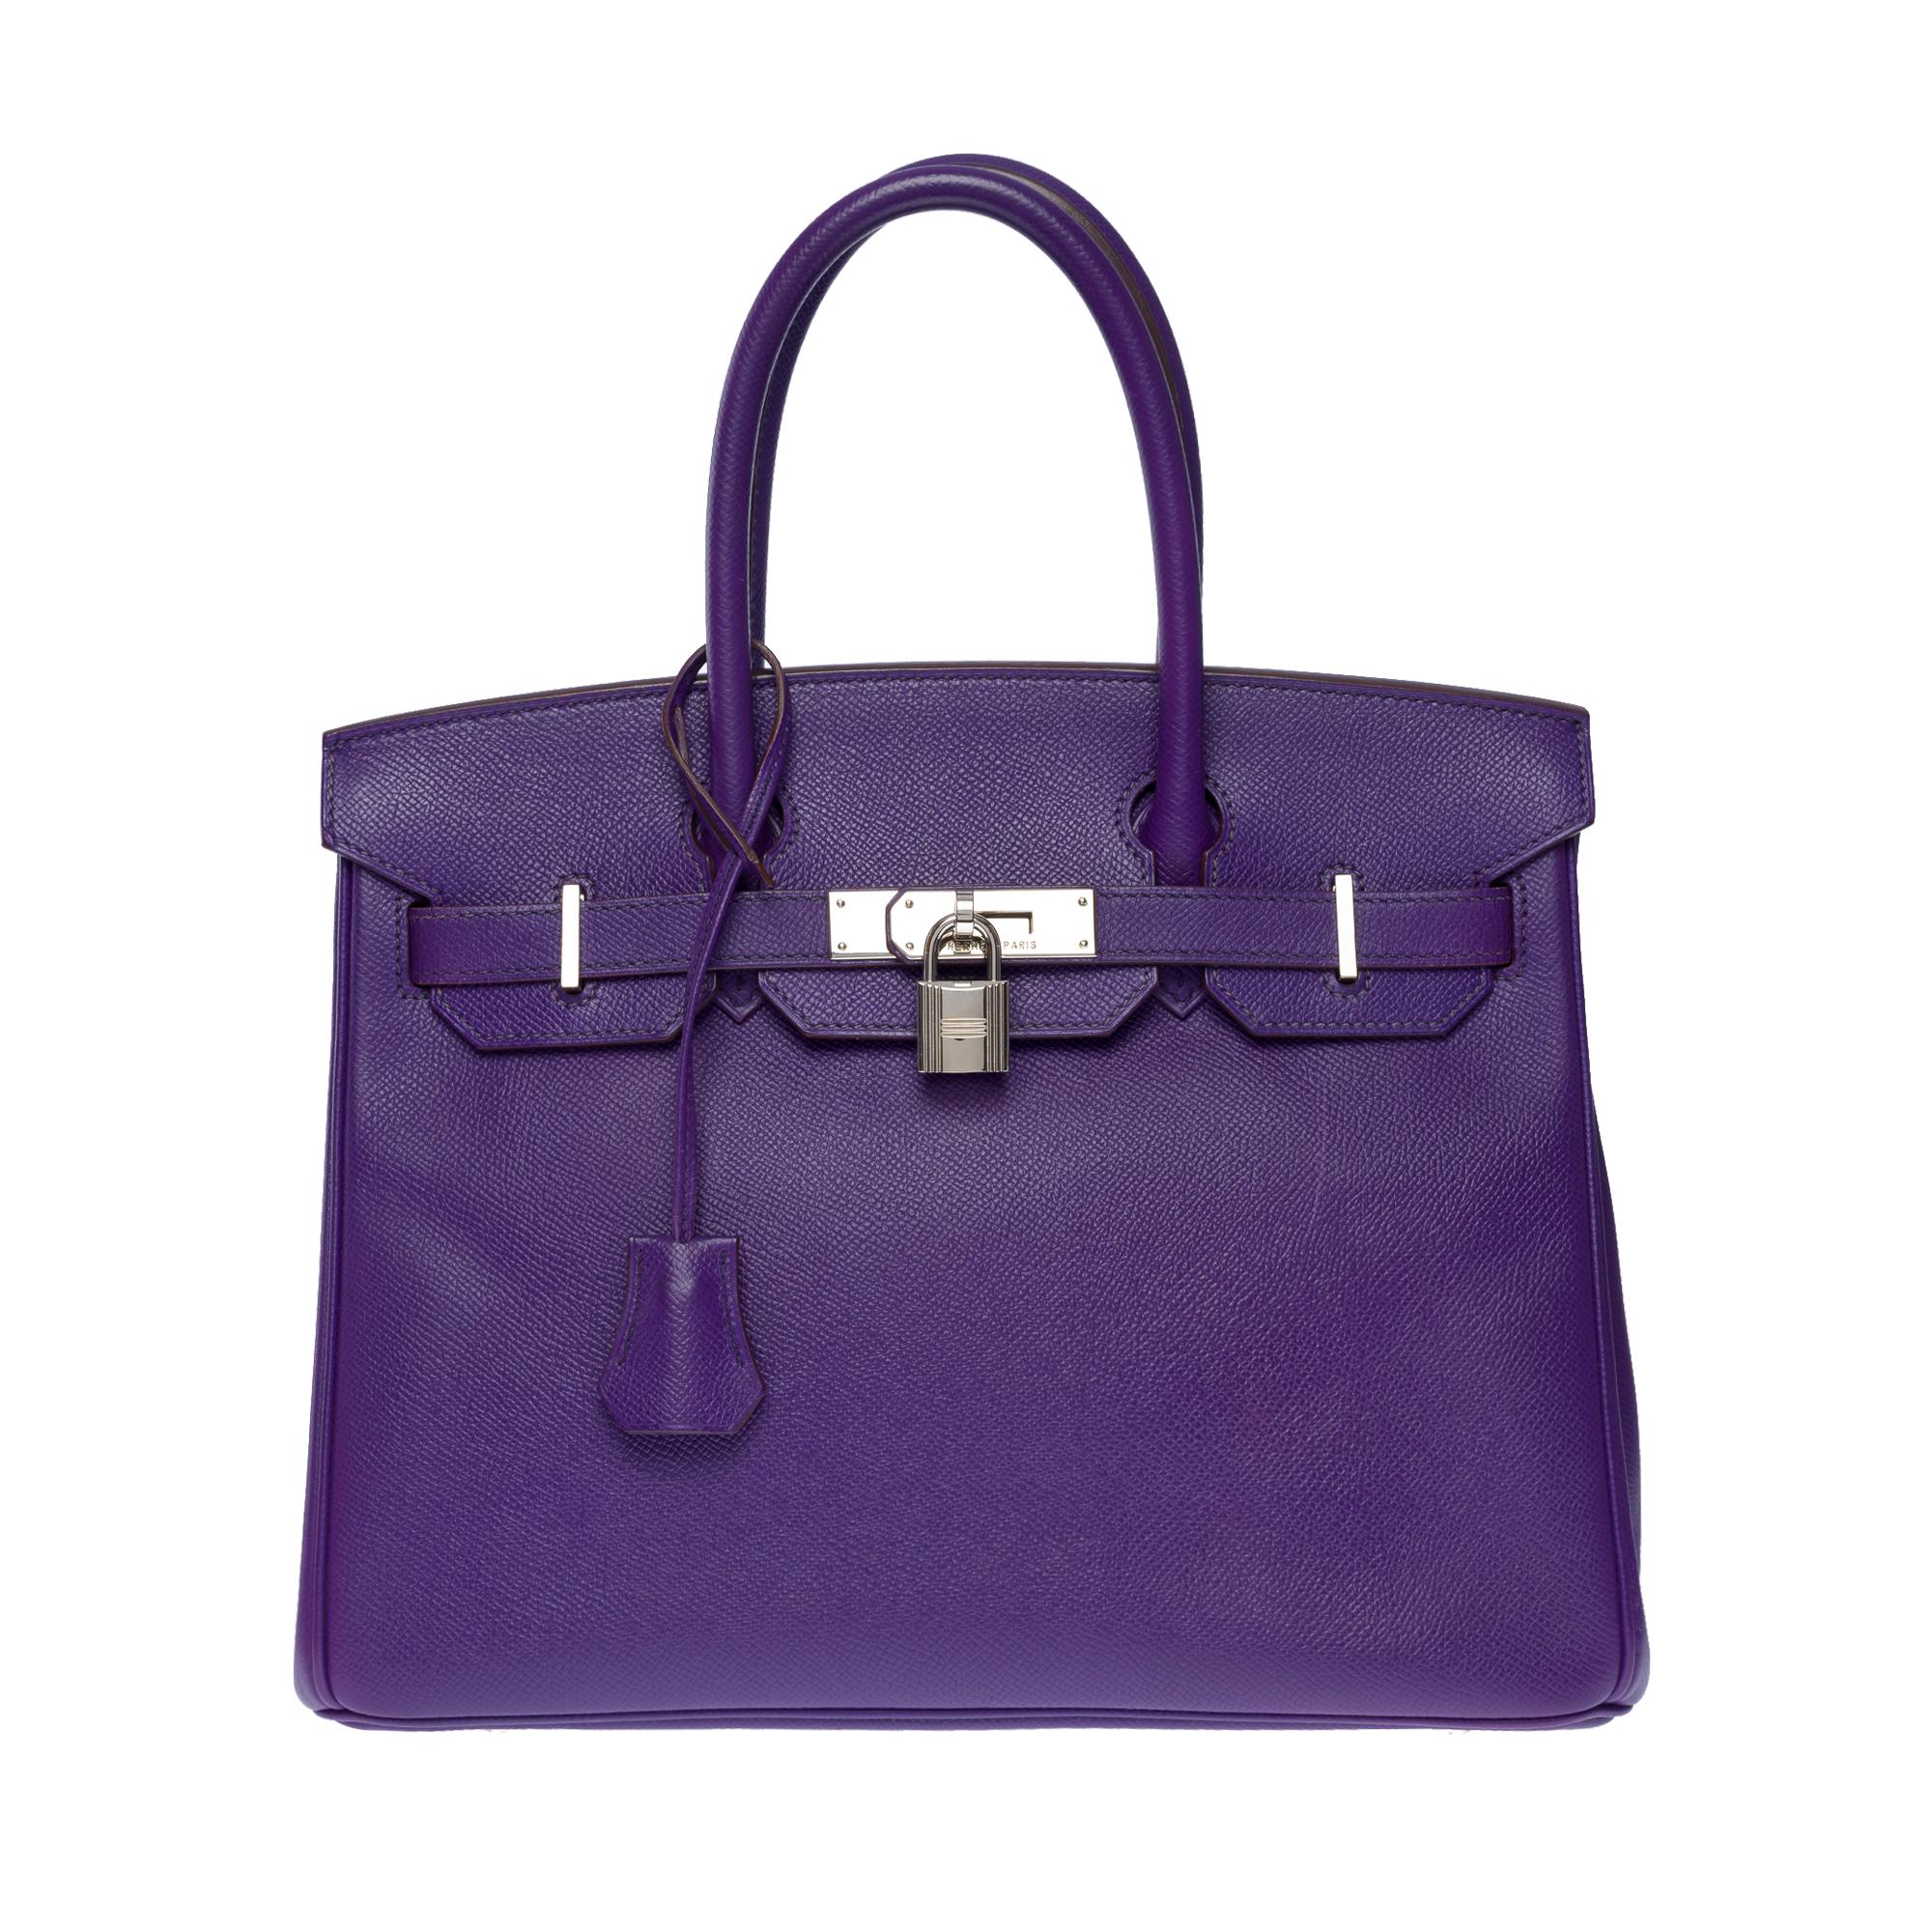 Exquisite Hermes Birkin 30 handbag in Iris Epsom Iris , palladium silver metal hardware, double handle in purple leather for a handmade

Flap closure
Inner lining in purple leather, one zippered pocket, one patch pocket
Signature: 